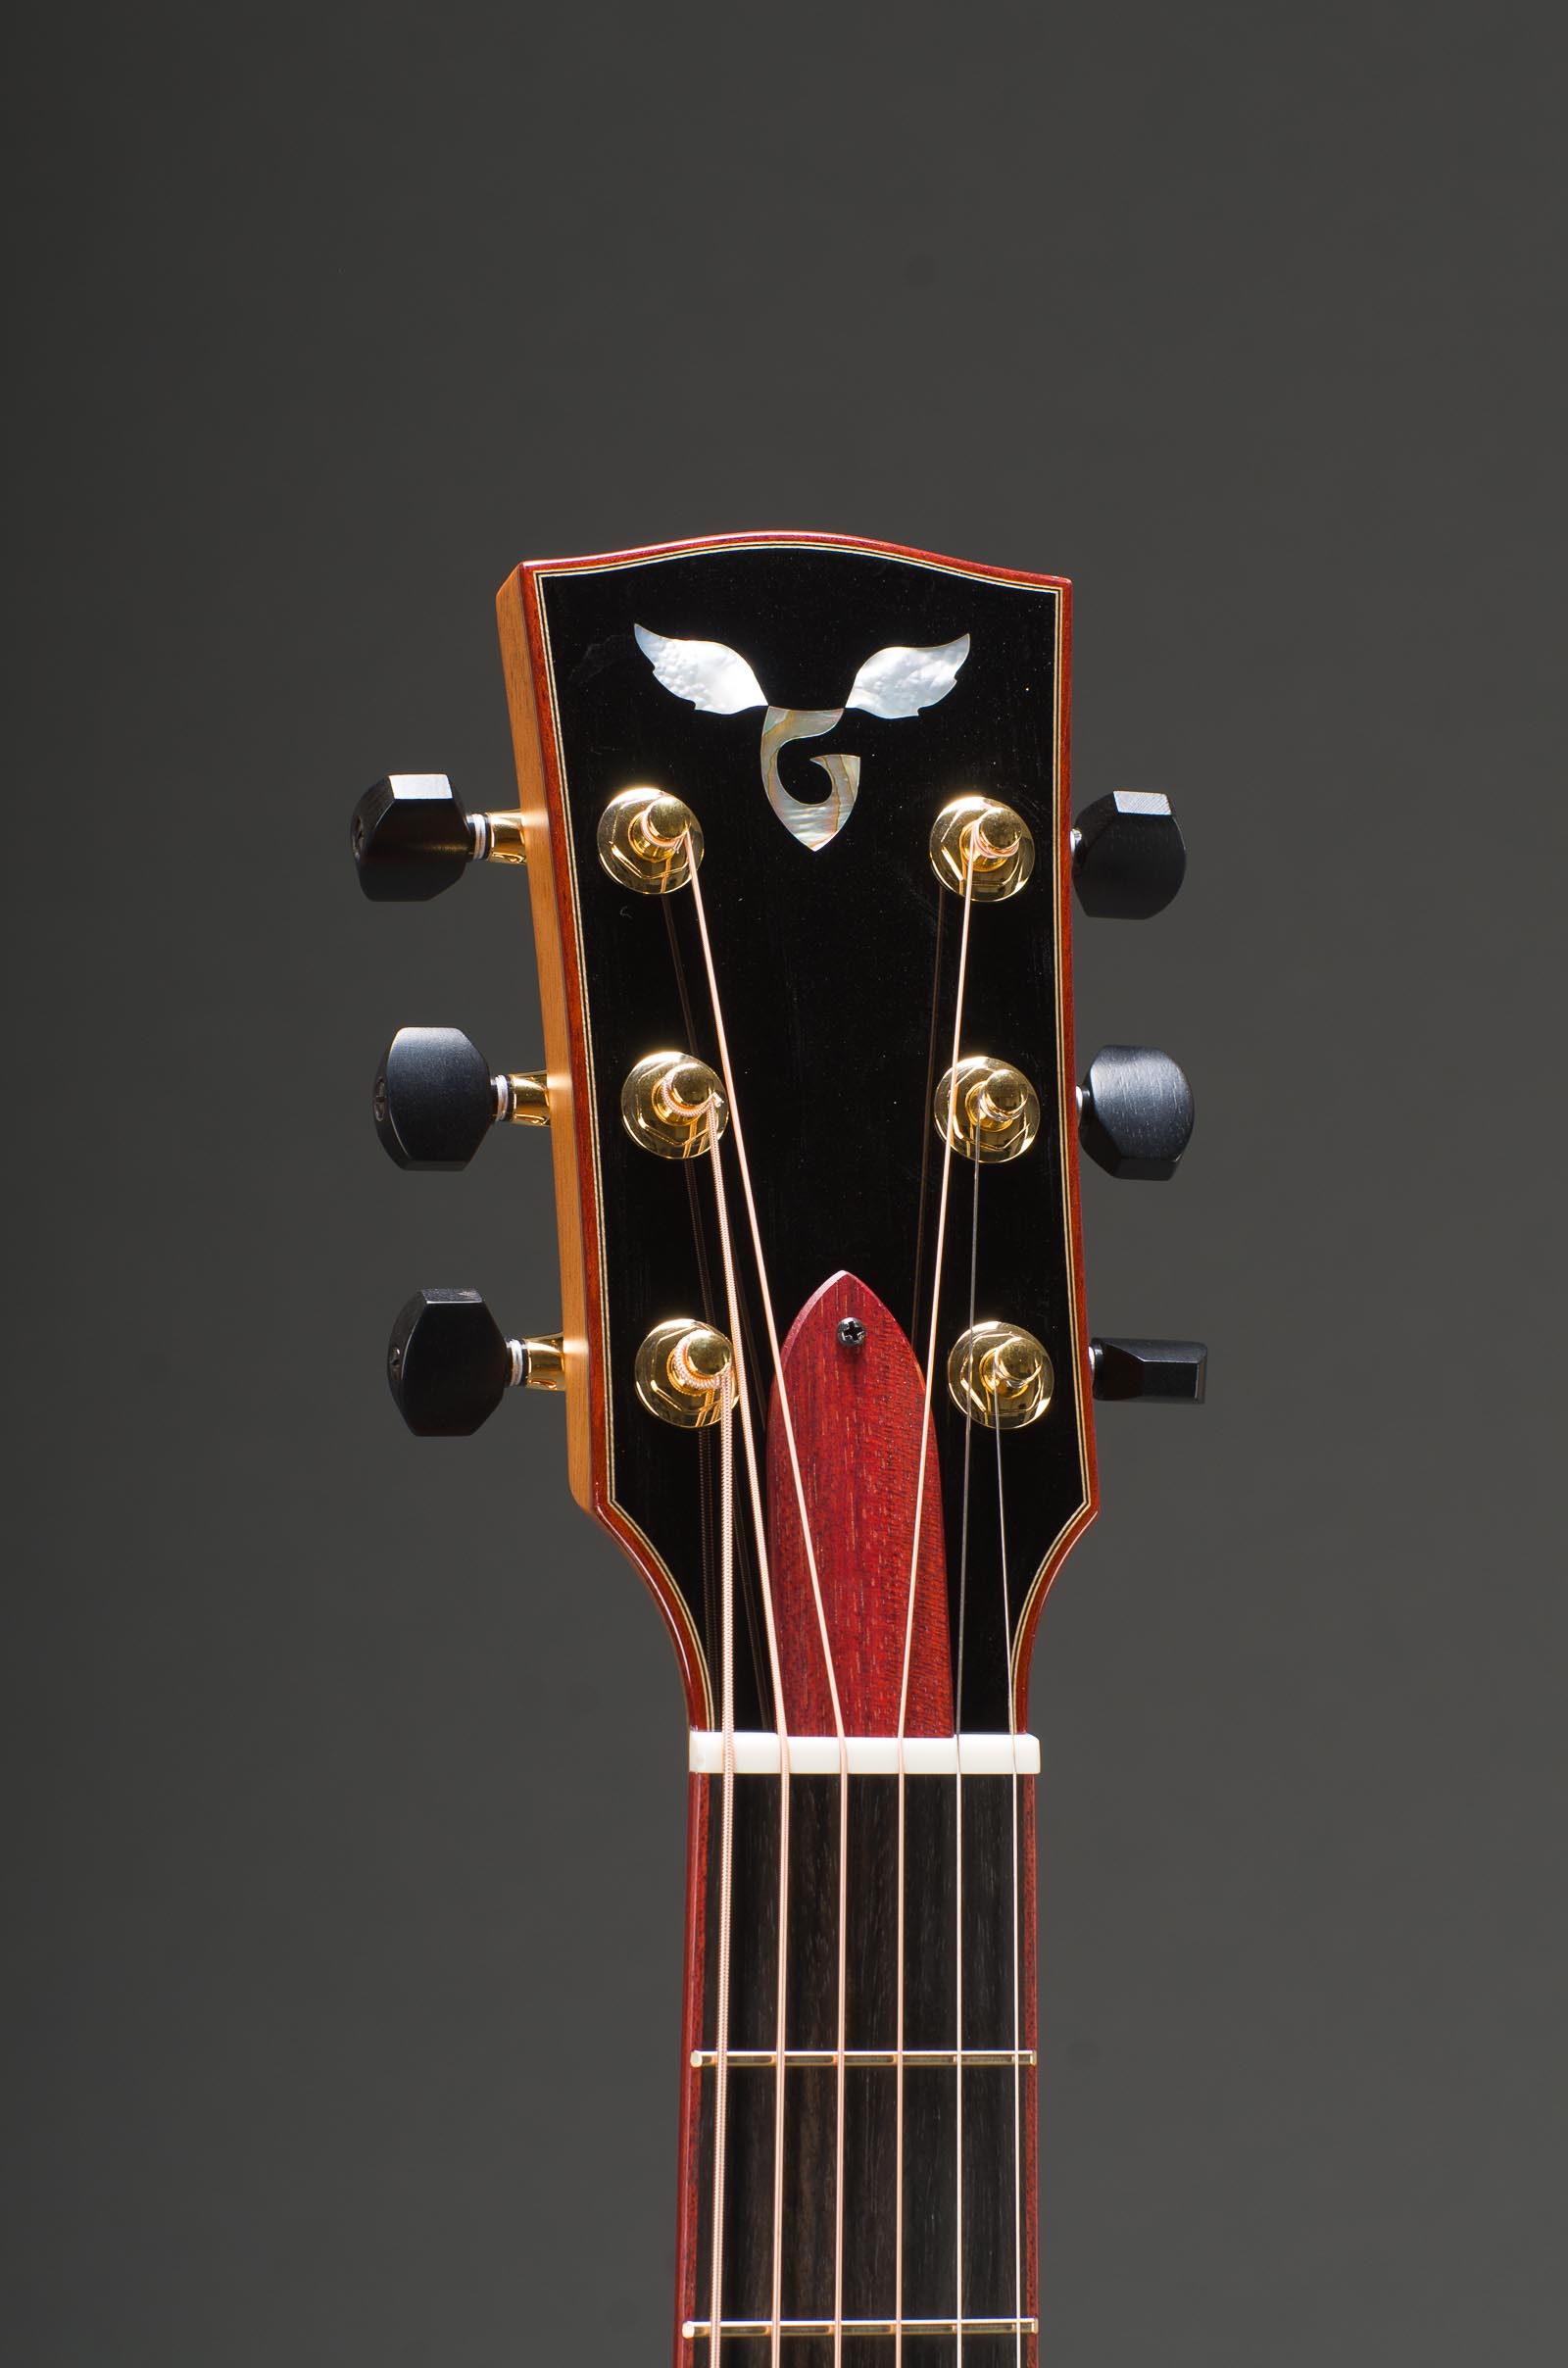 14-Fret Parlor - All Ribbon Mahogany Including Top, Fancy Abalone Rosette, & Bloodwood Binding - Including Matching Fretboard Option, Fancy G - MOP Wings, Gold Gotoh 510 Mini Tuners with Ebony Buttons